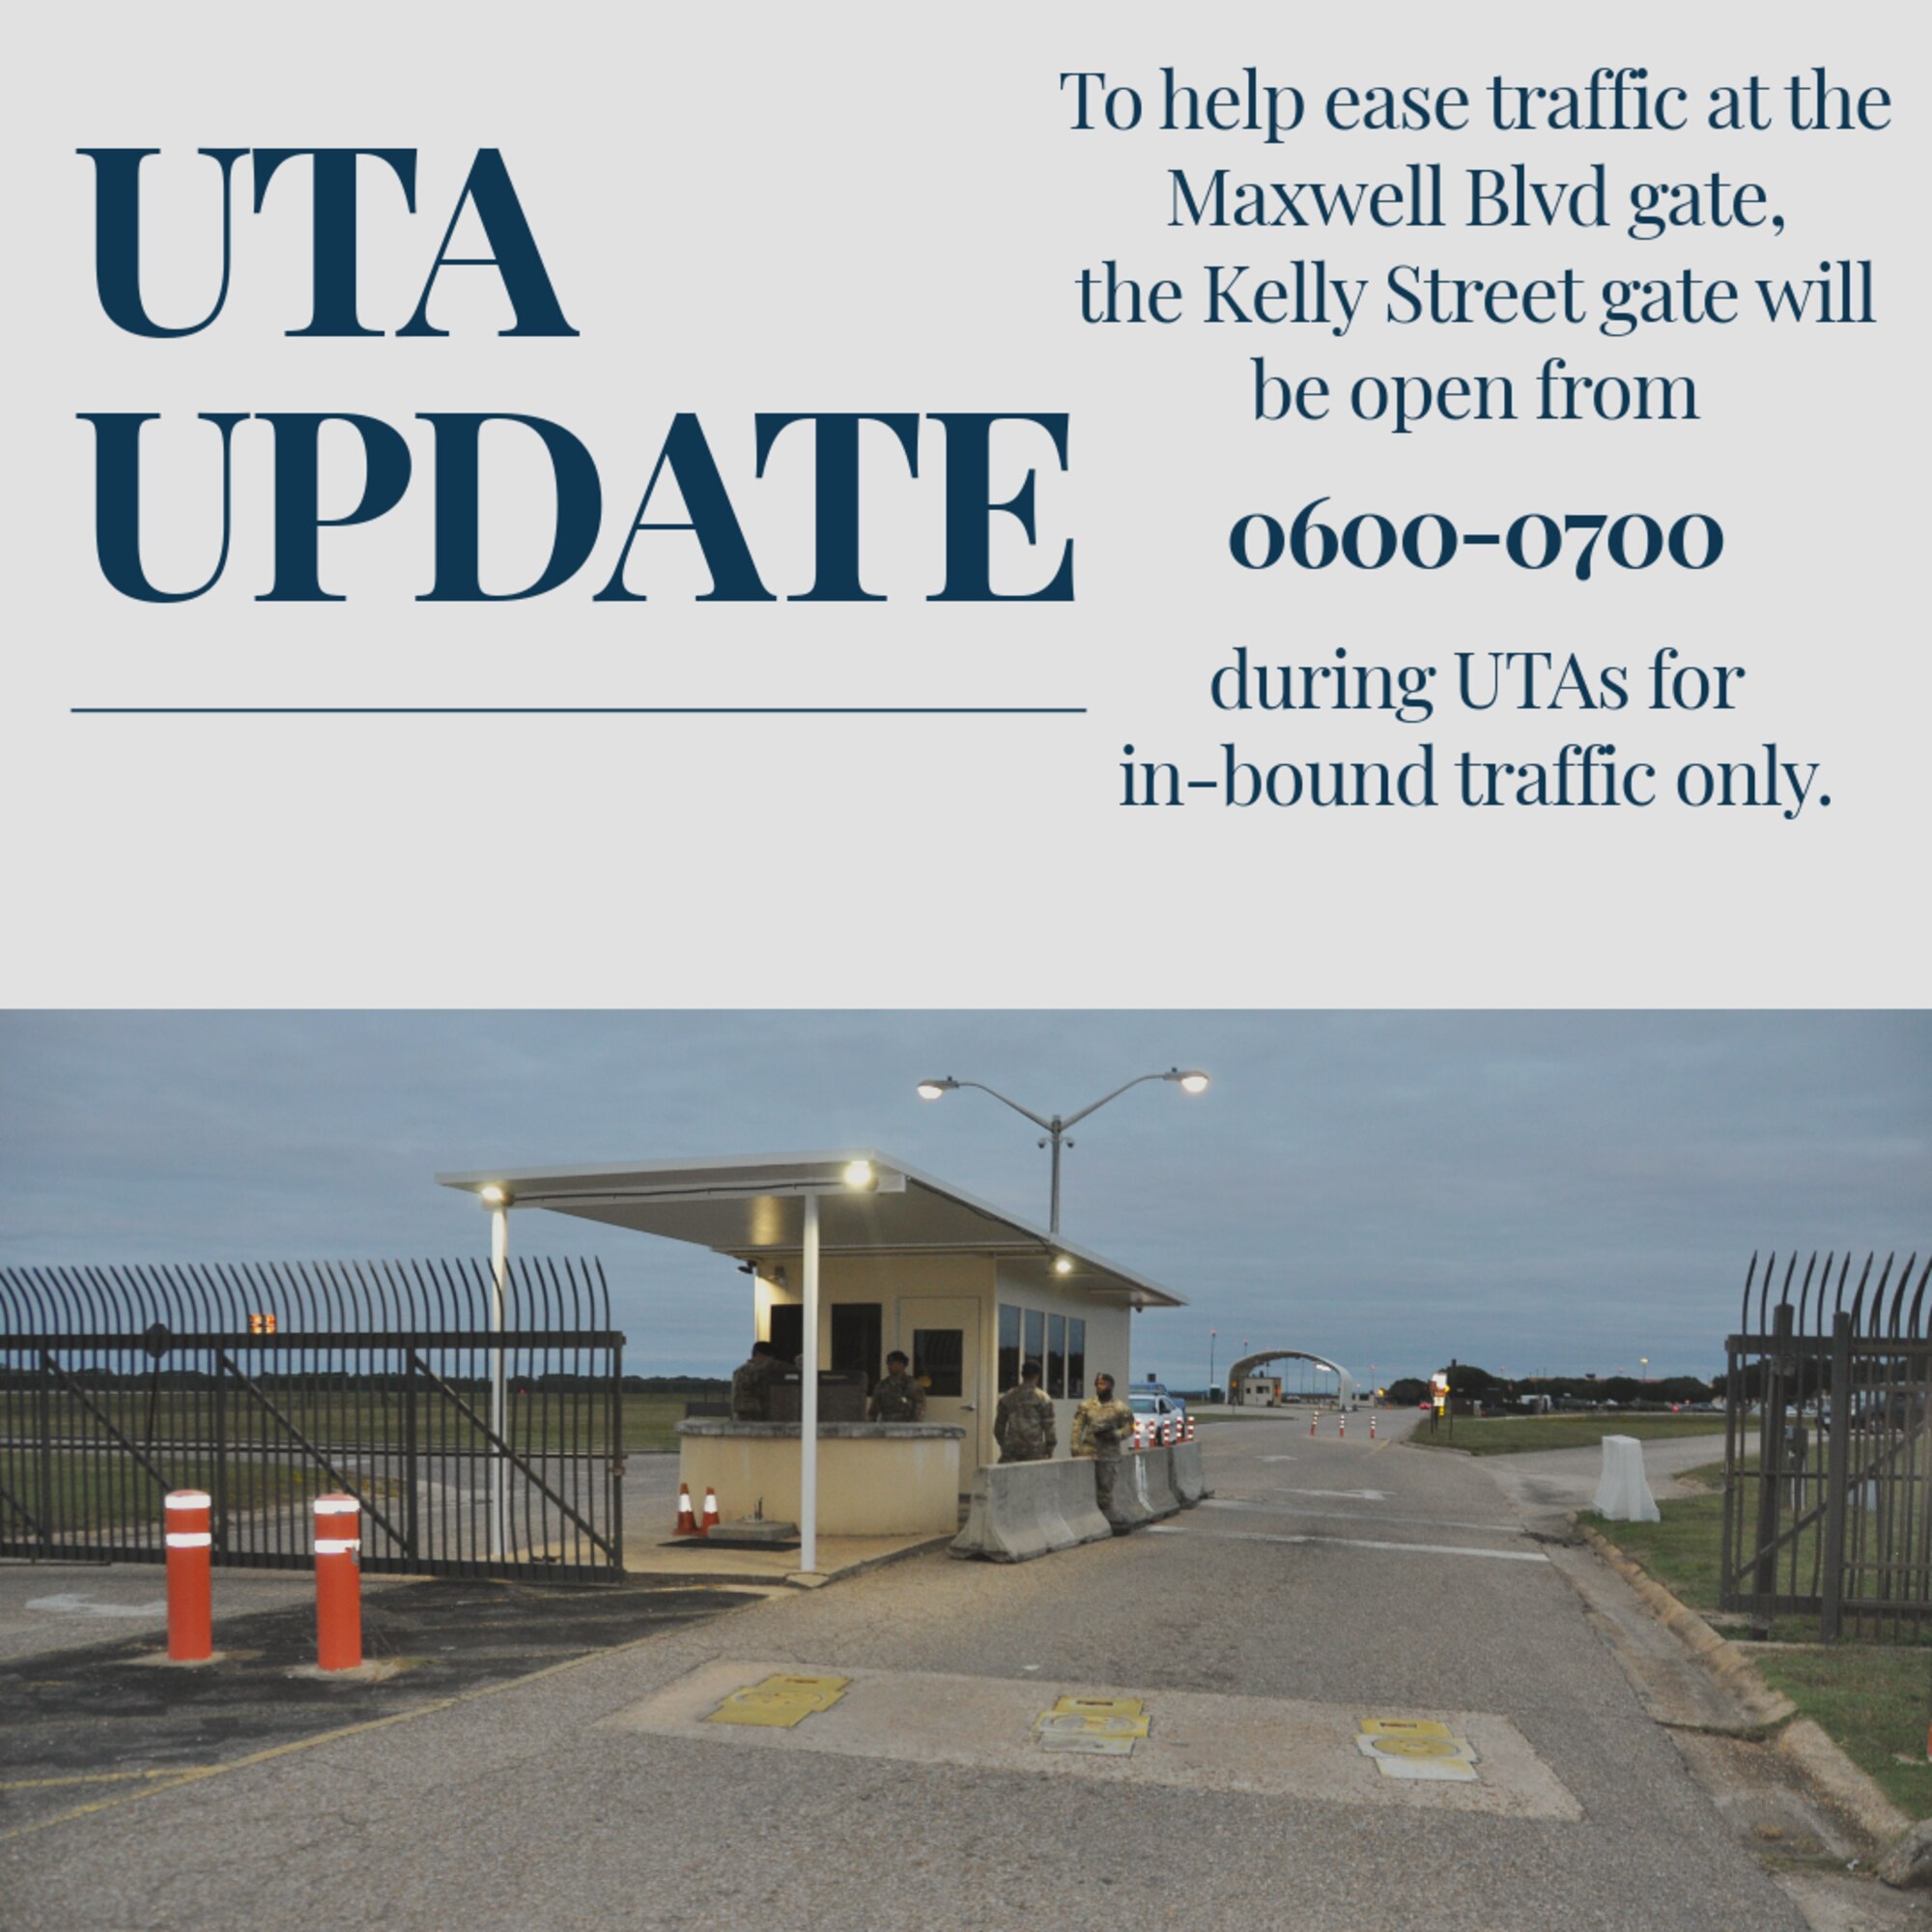 an infographic updating alternate gate entry hours